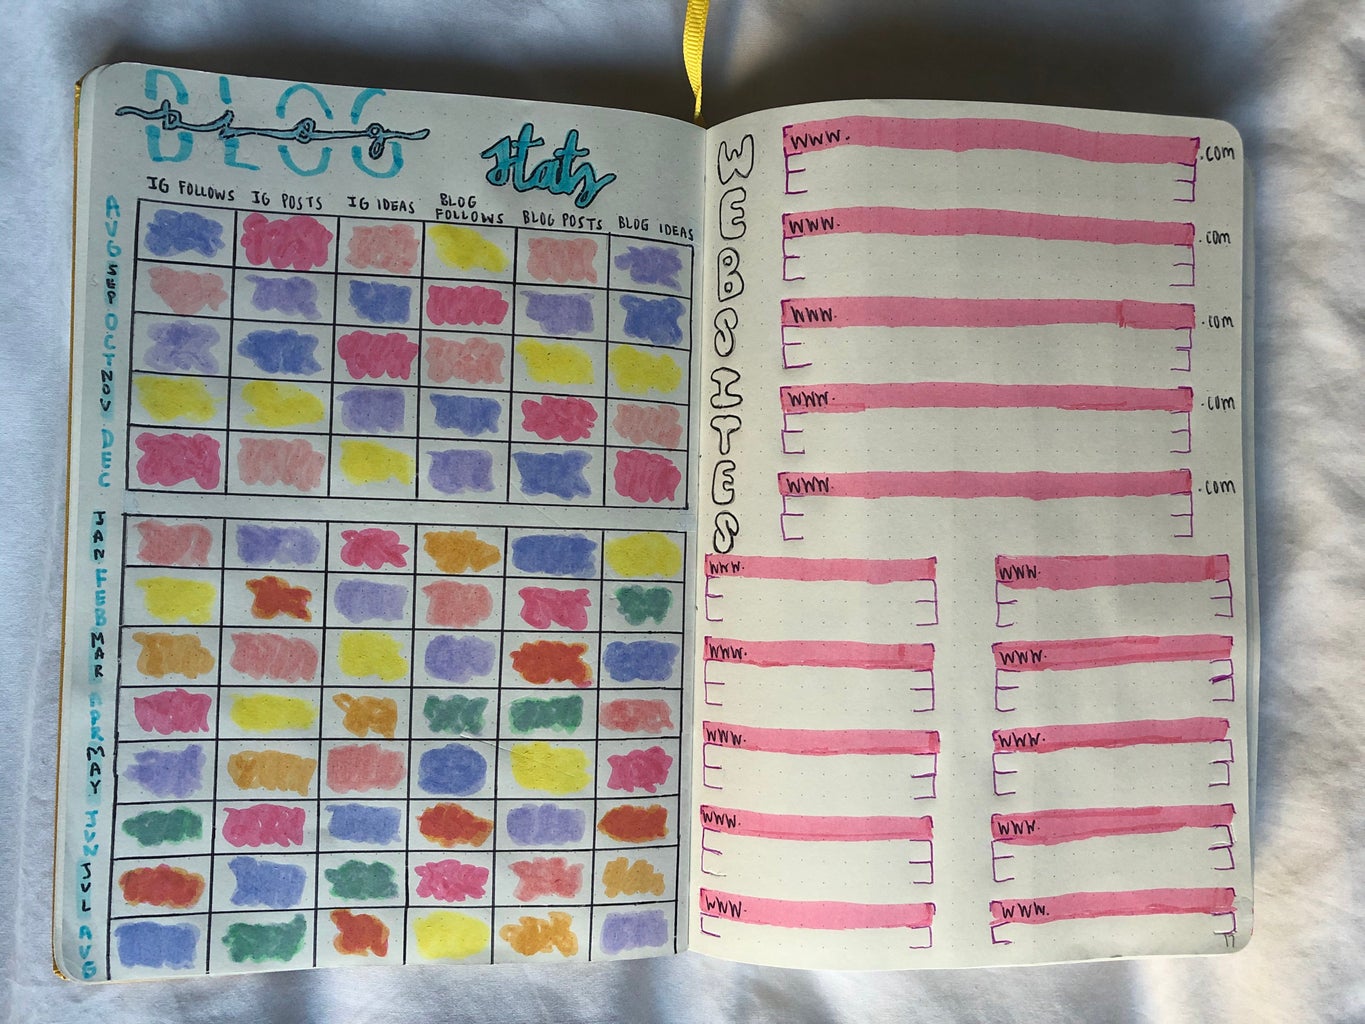 Bullet journal spread of creative pages consisting of blog information and important websites.